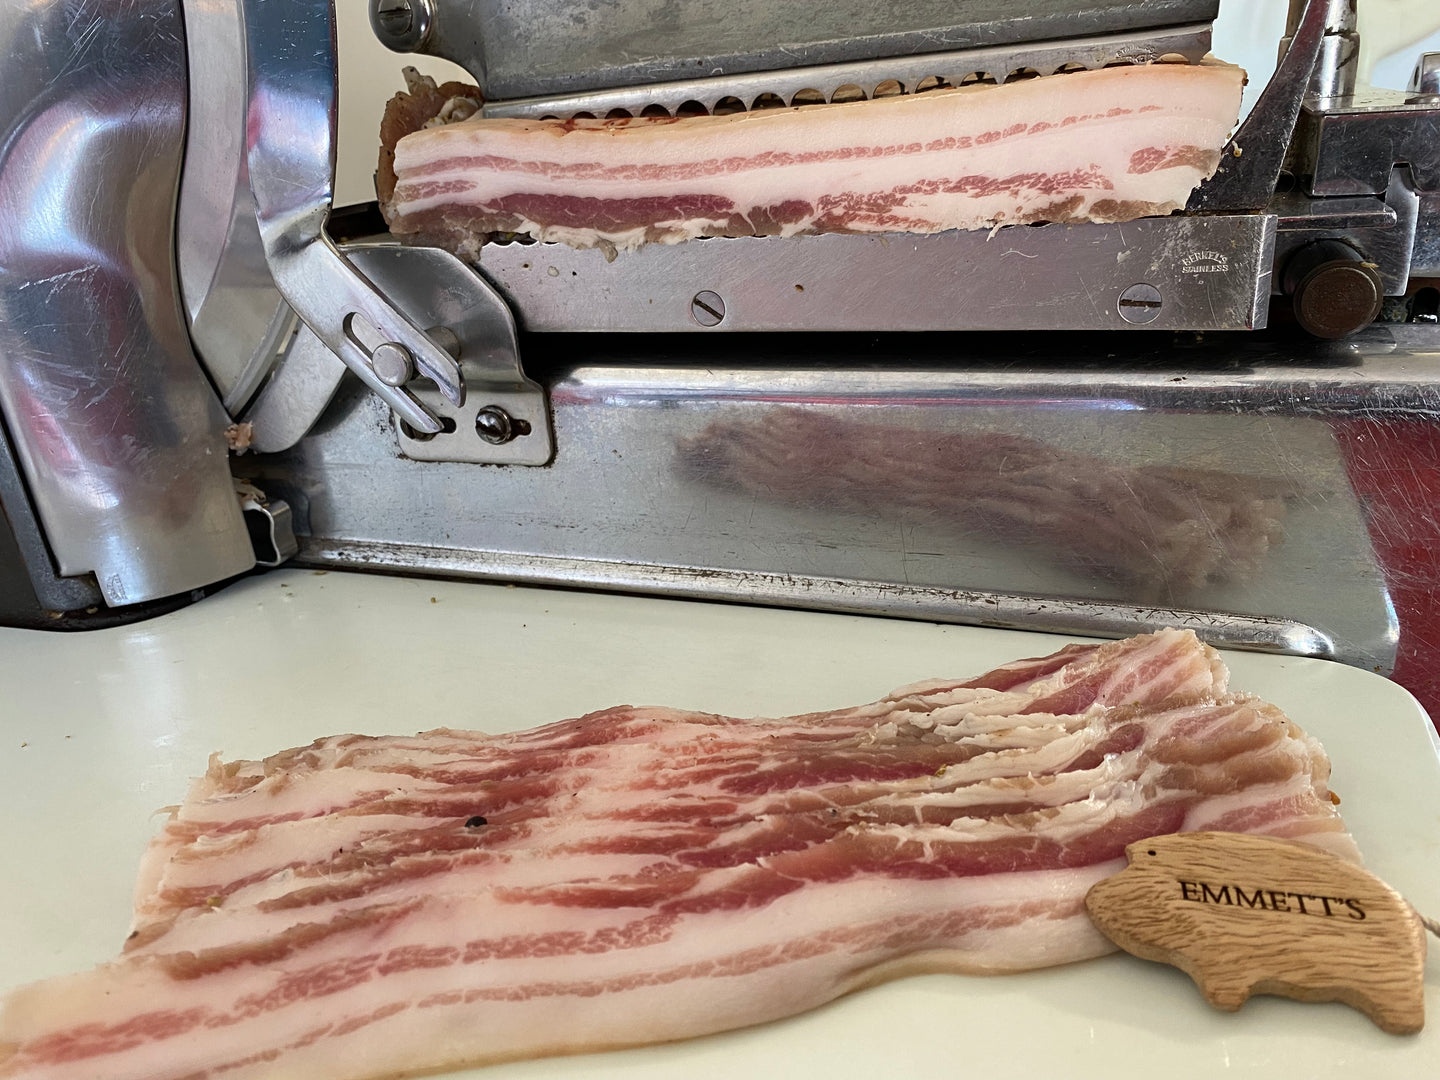 Naturally Cured Unsmoked Sliced Streaky Bacon - Emmett's